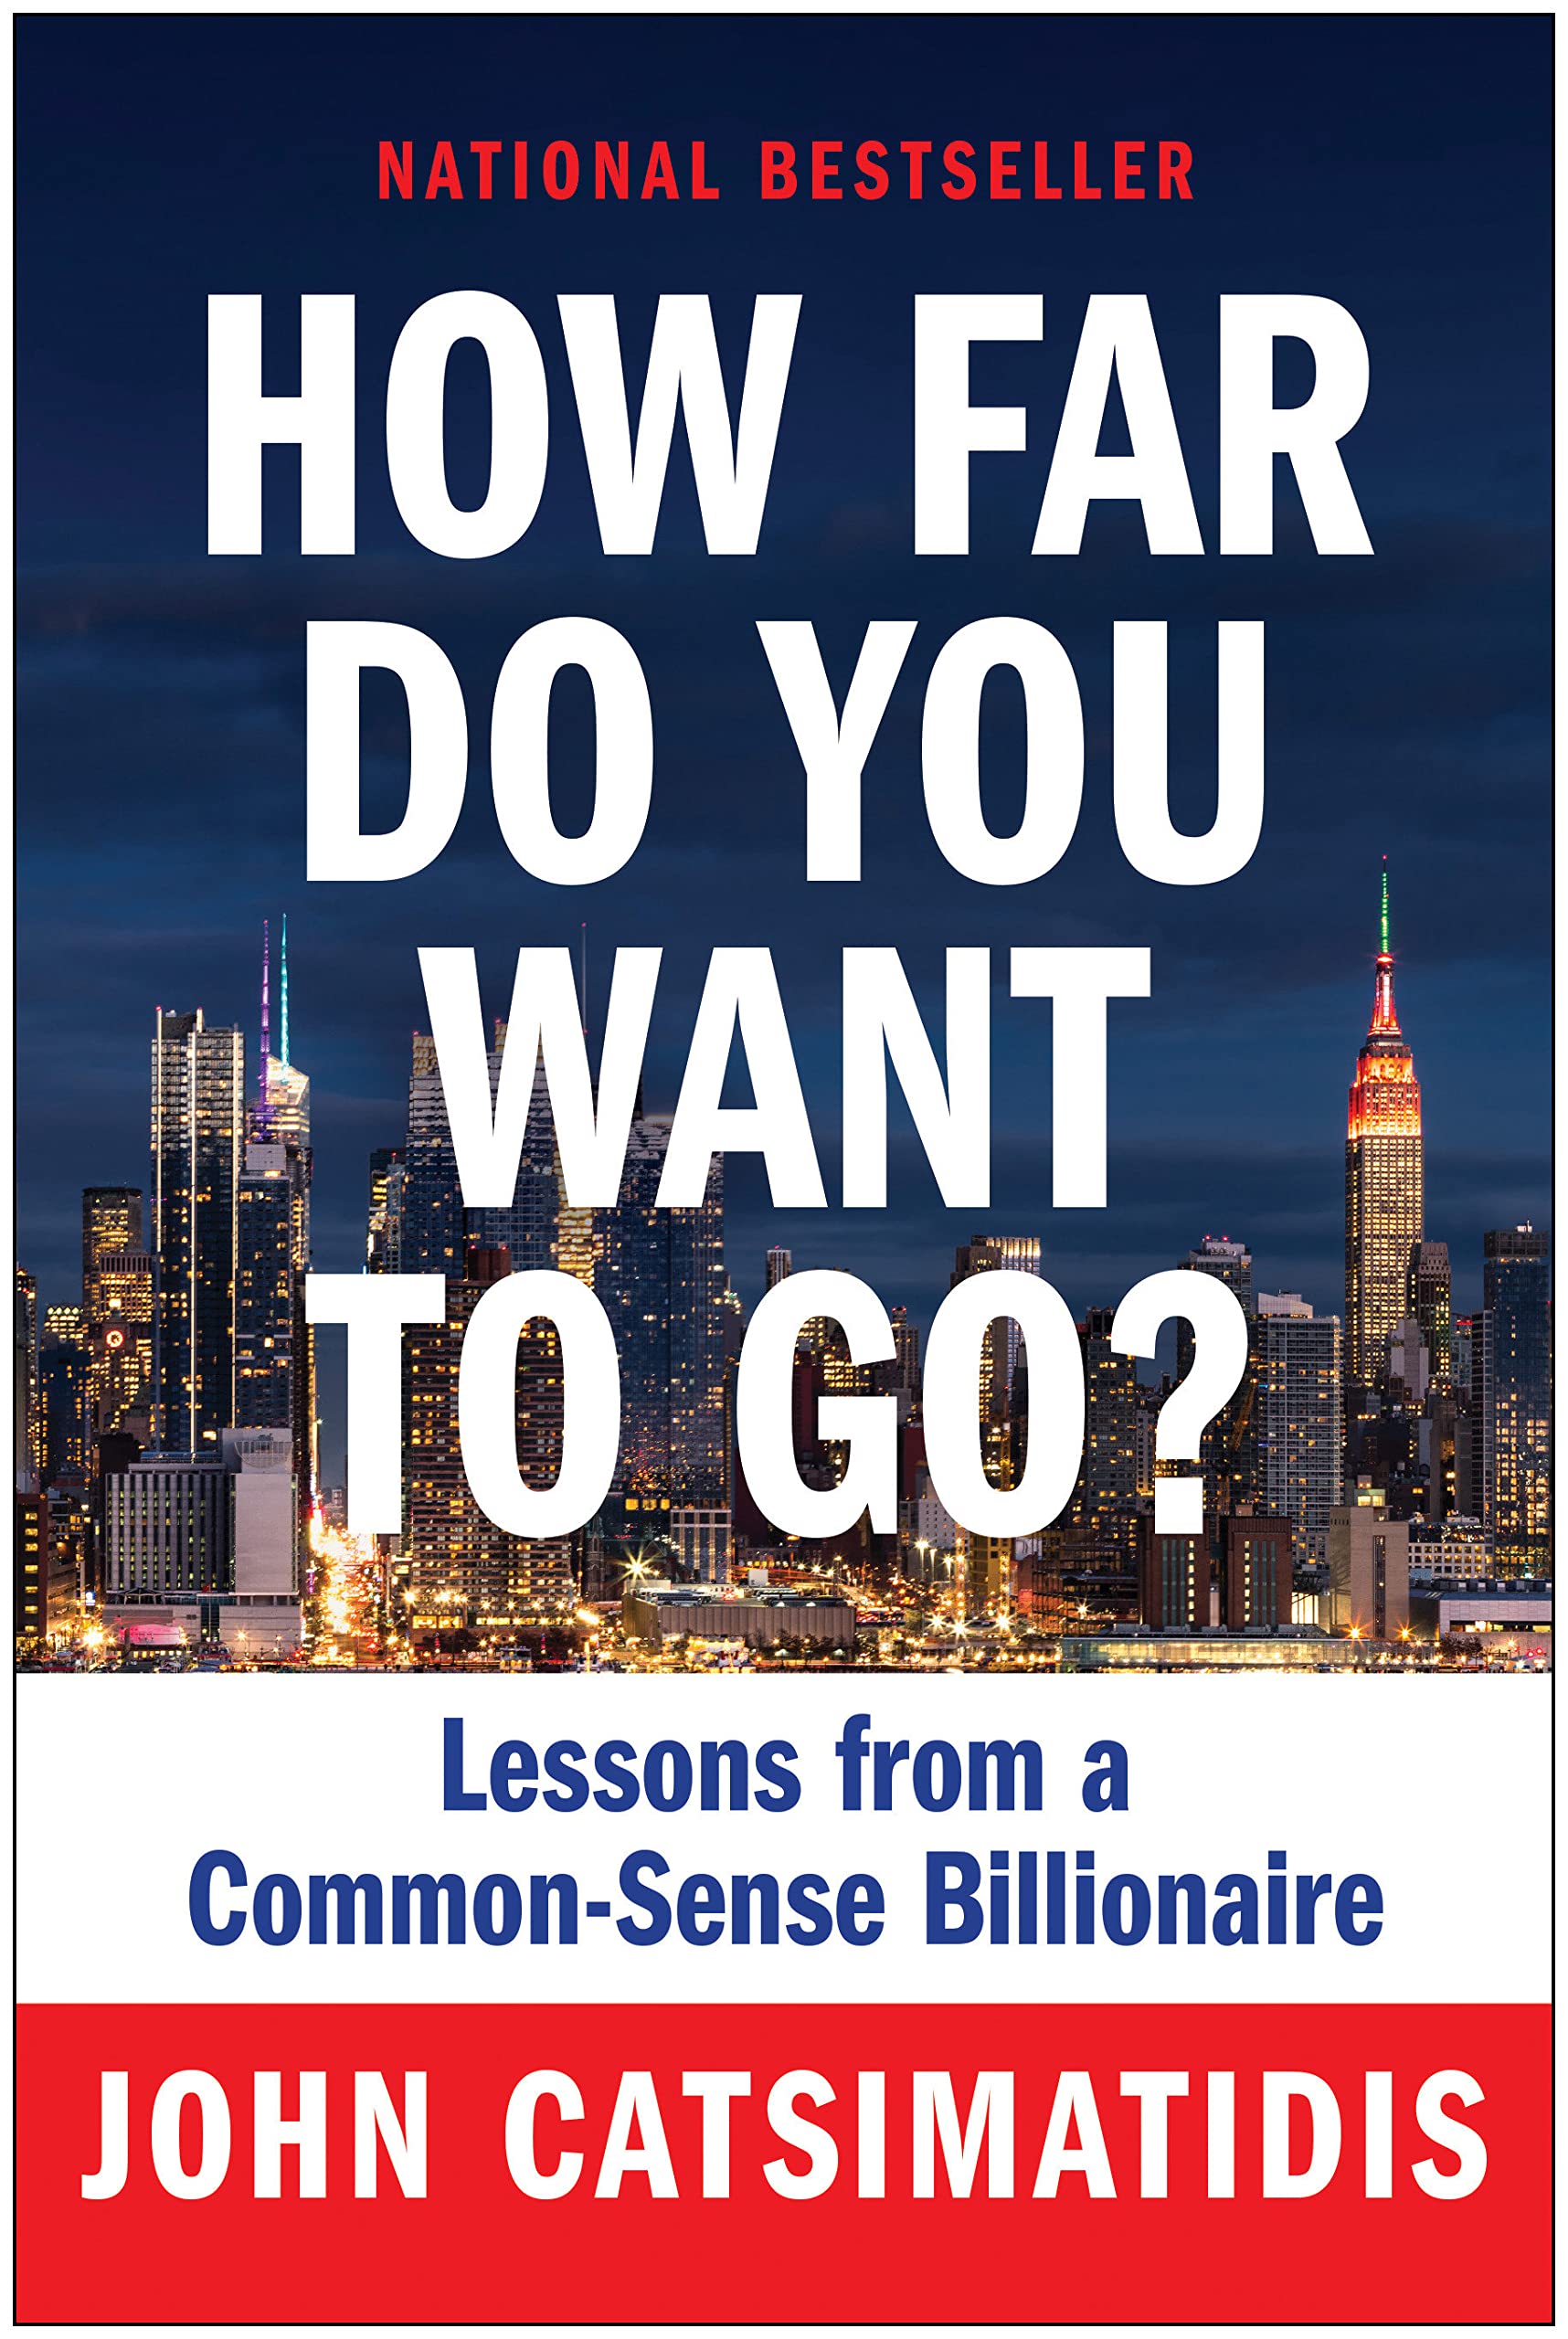 How Far Do You Want to Go?: Lessons from a Common-Sense Billionaire